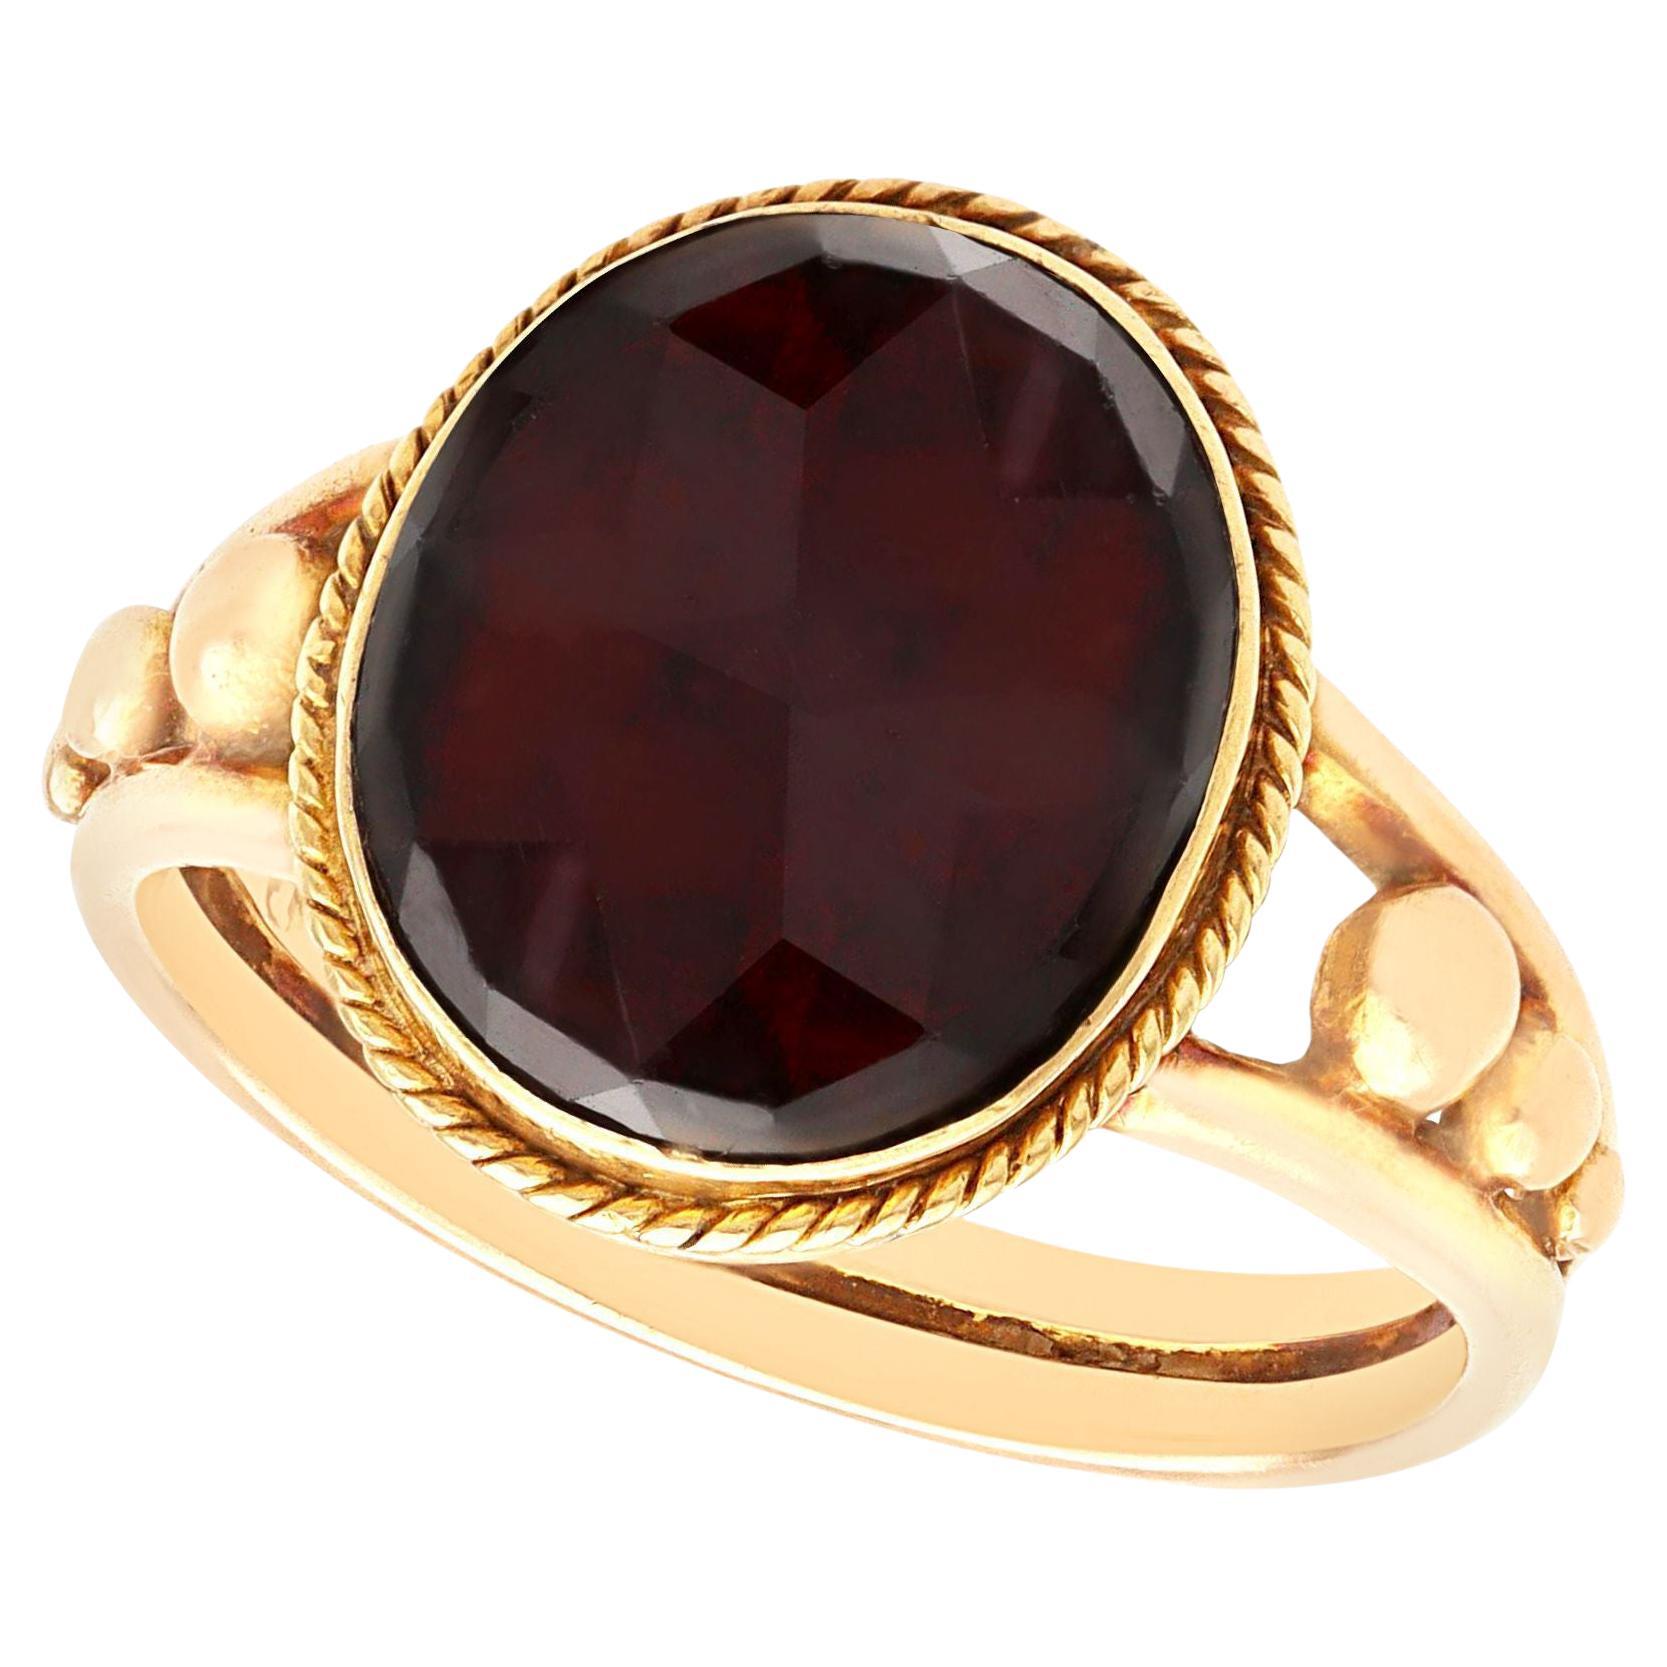 Antique Victorian 4.75 Carat Garnet and Yellow Gold Cocktail Ring